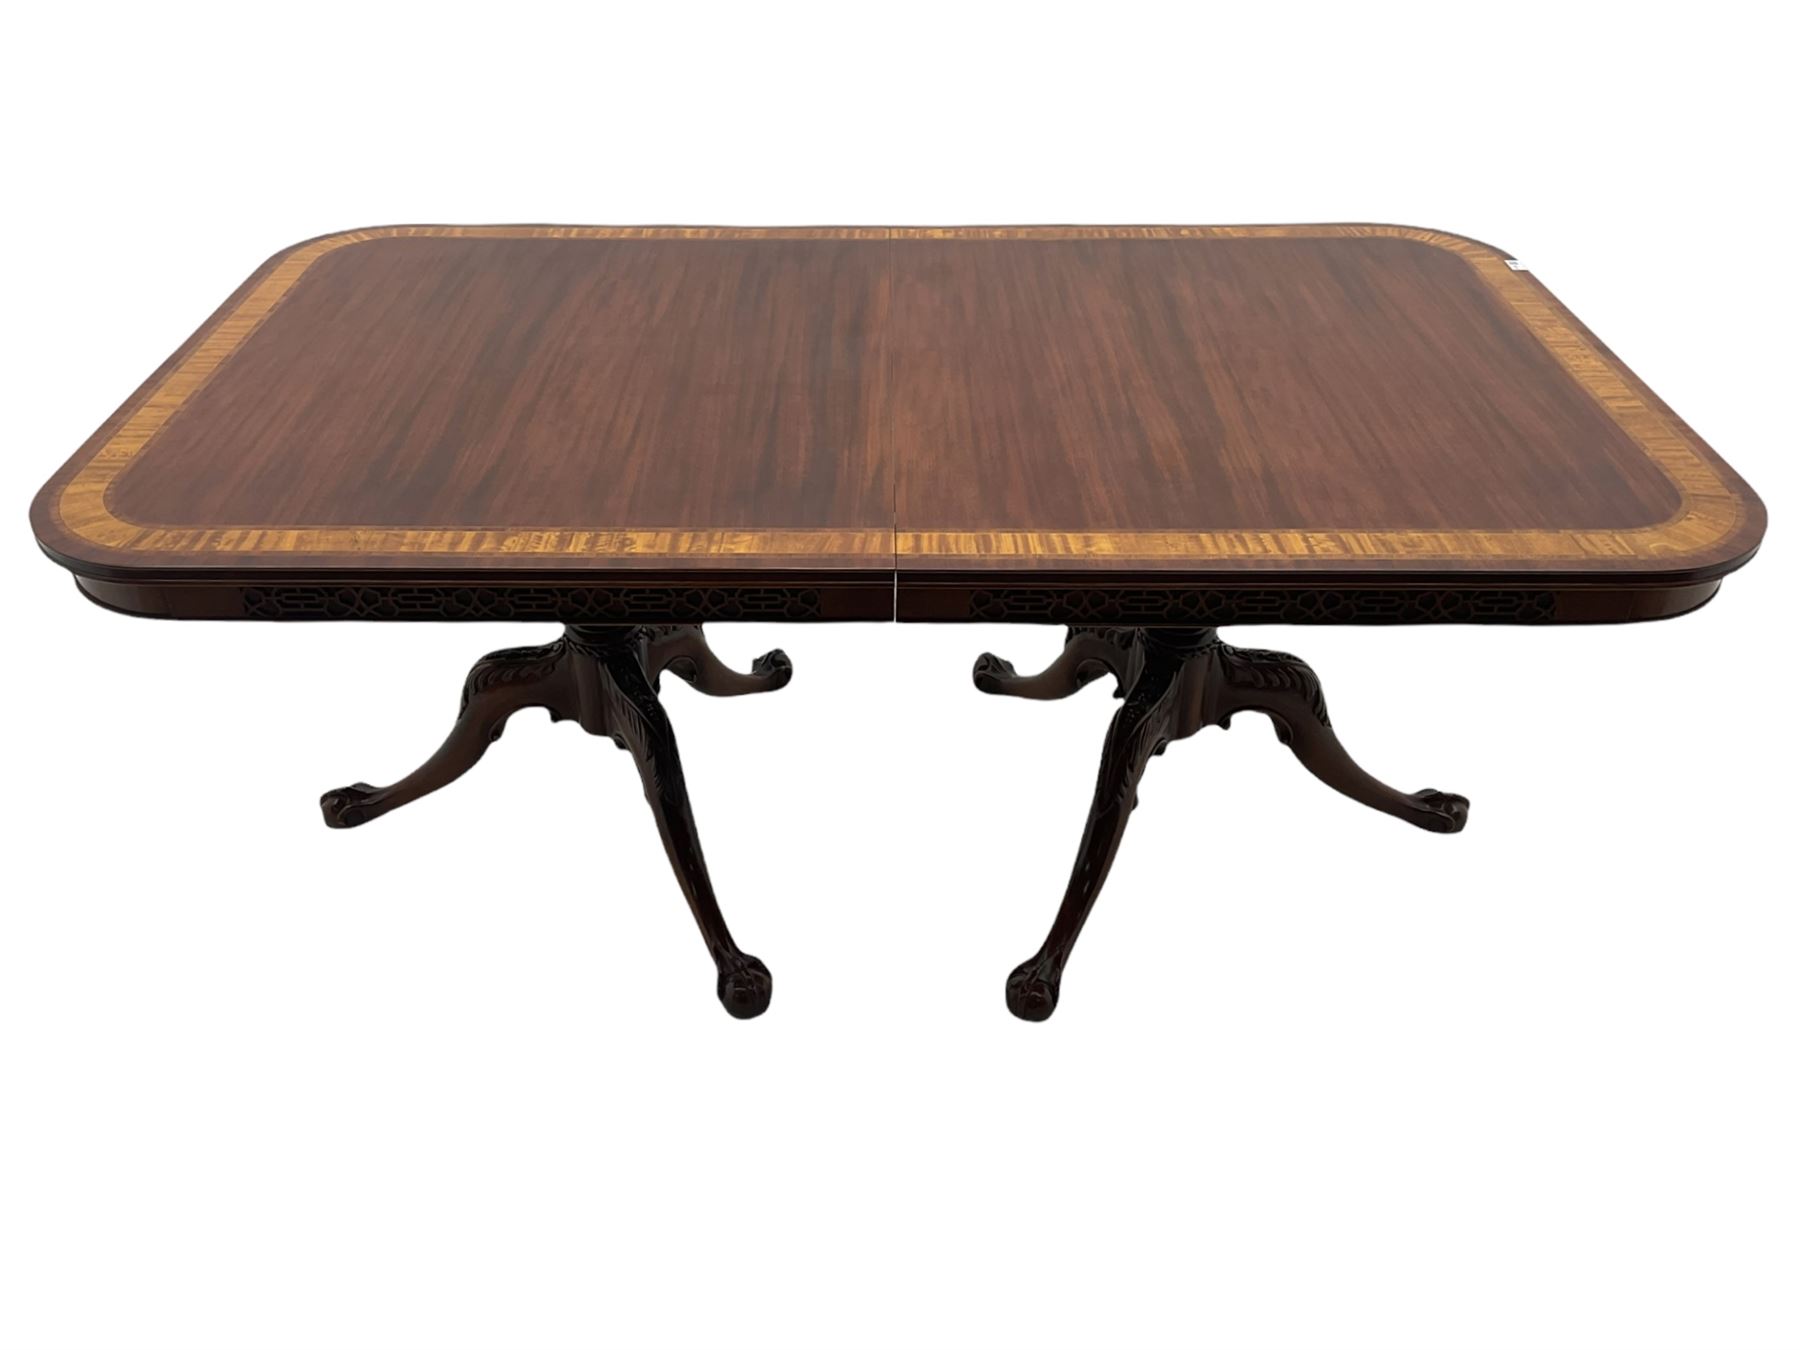 Wade Georgian style mahogany extending dining table with leaf - Image 13 of 27